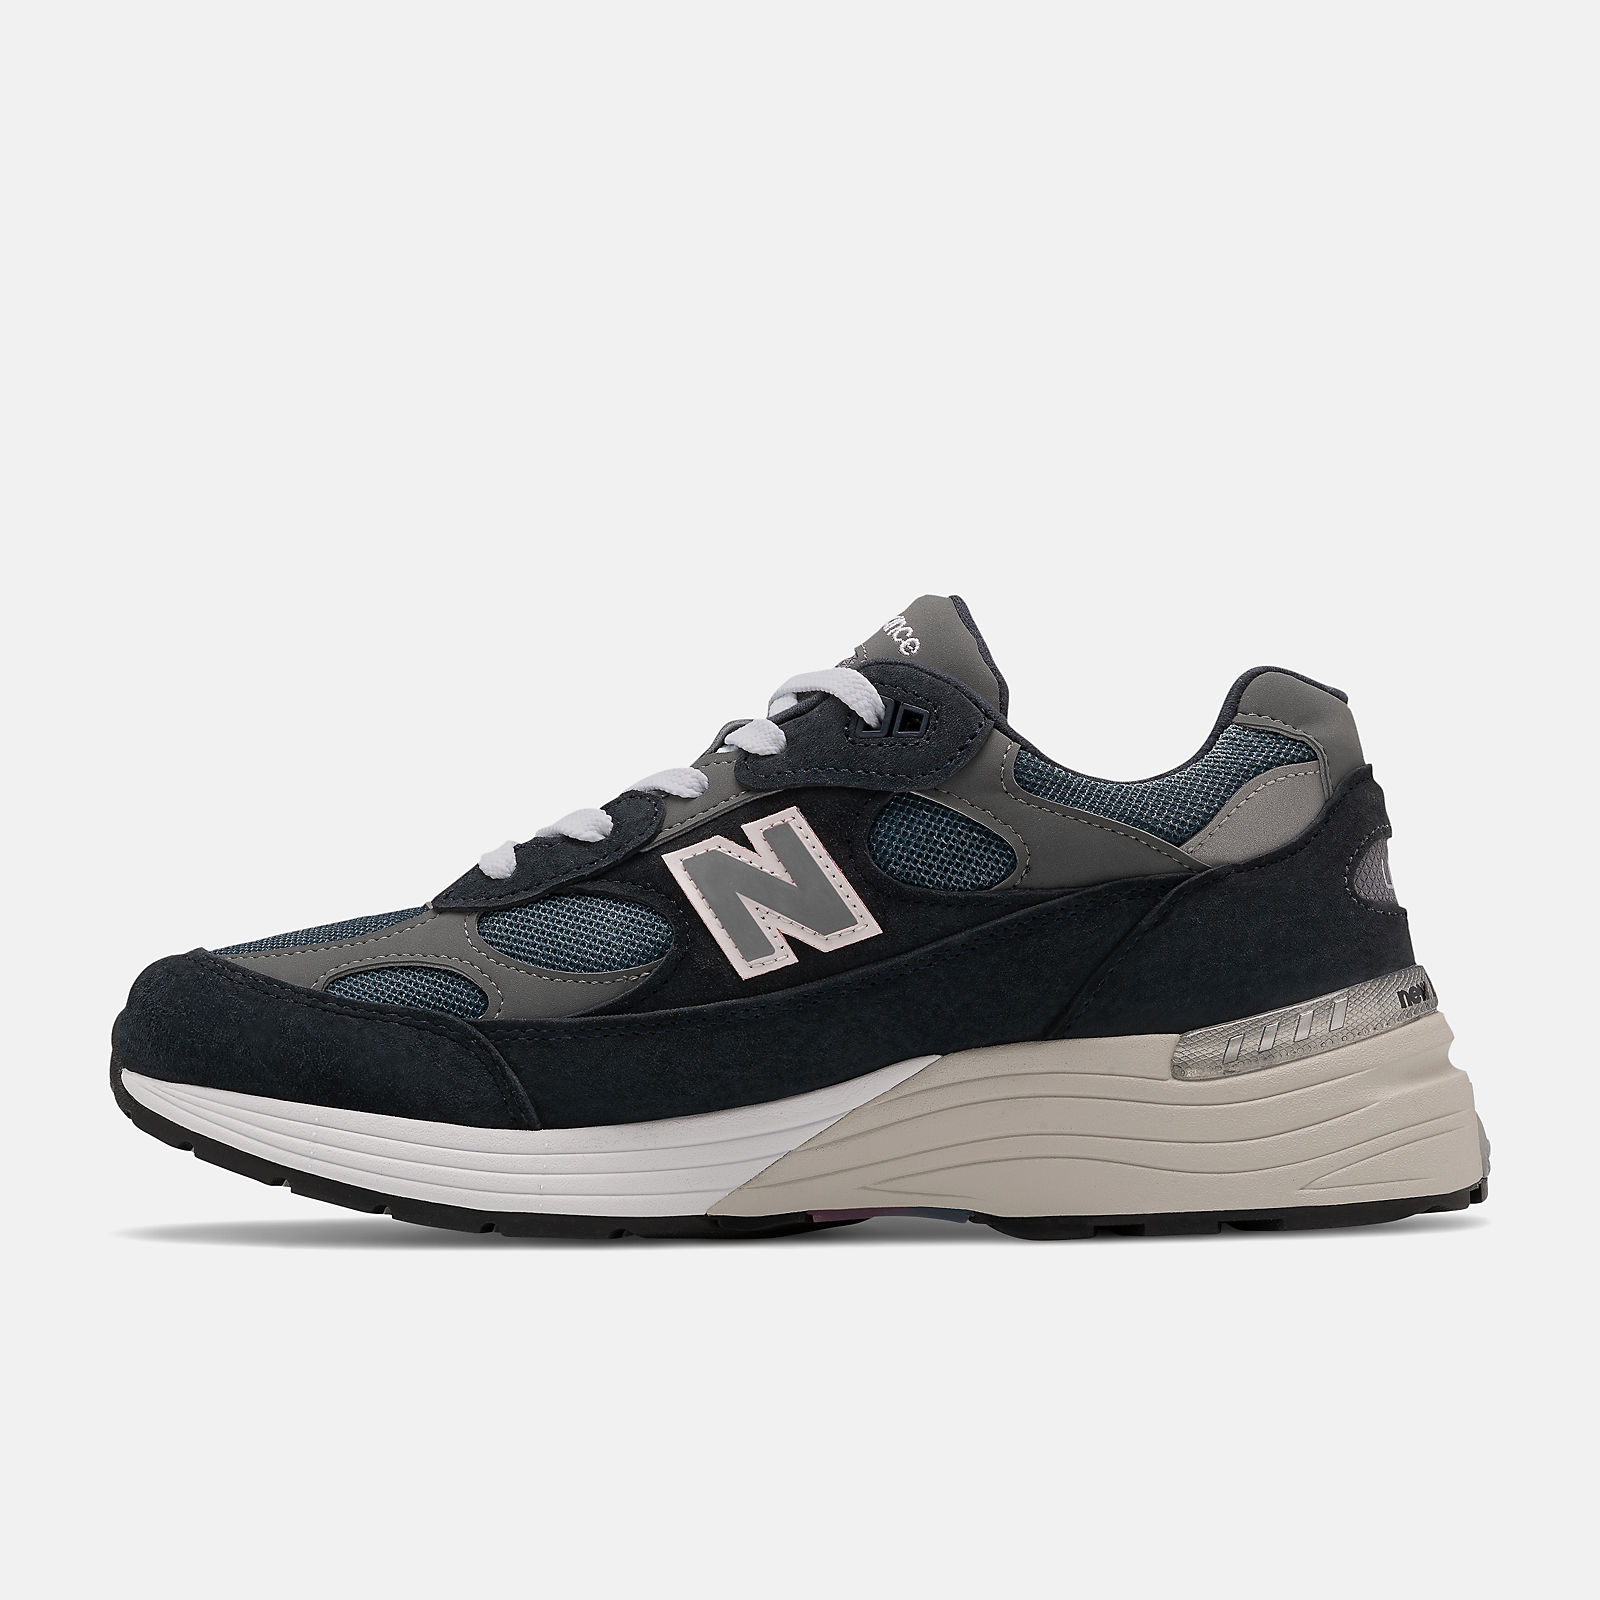 Made in US 992 - New Balance